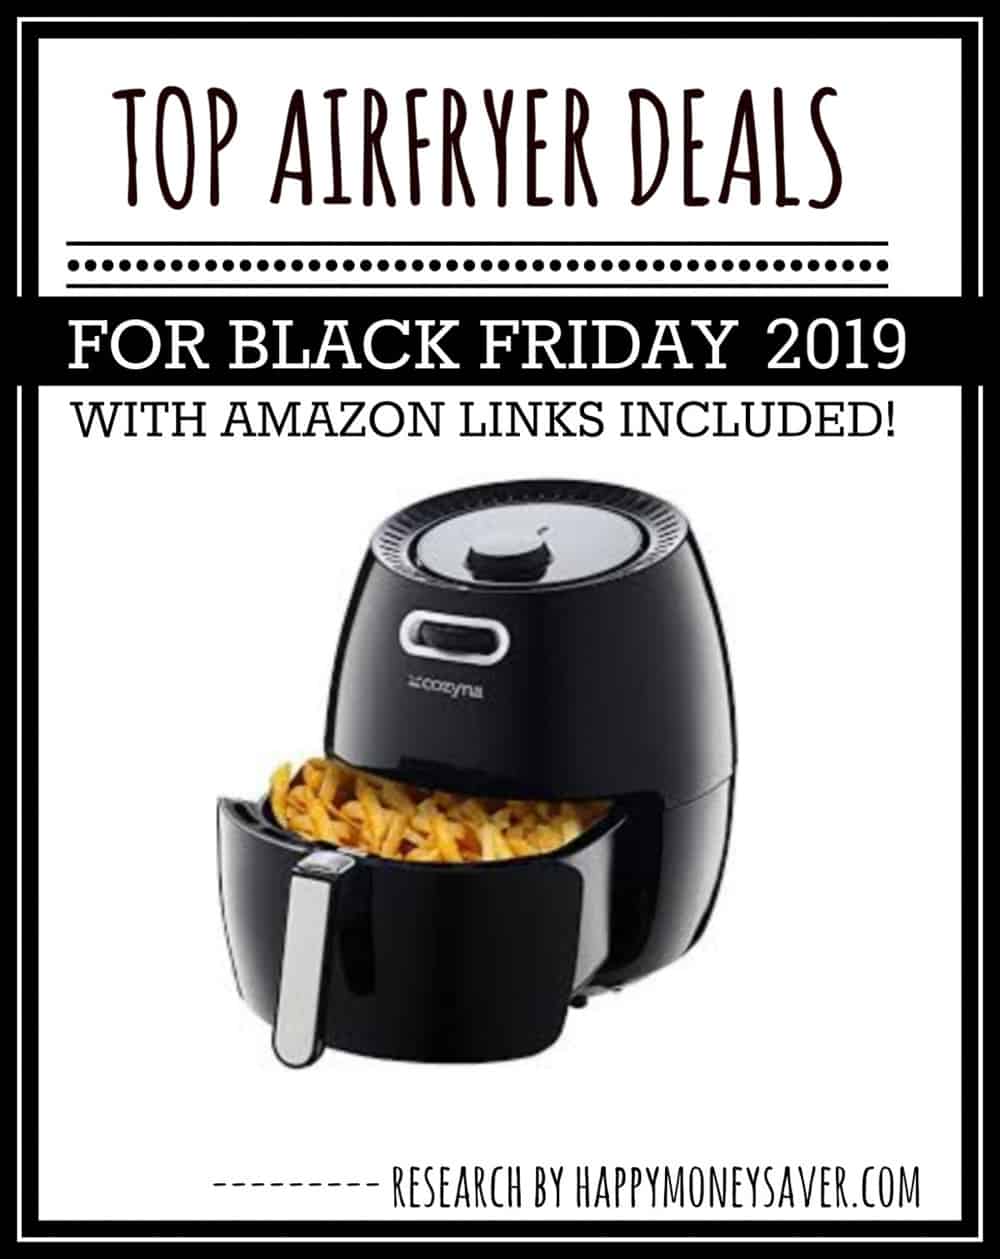 Top Airfryer Deals for Black Friday 2019 with amazon links included graphic with picture of airfryer holding fries.